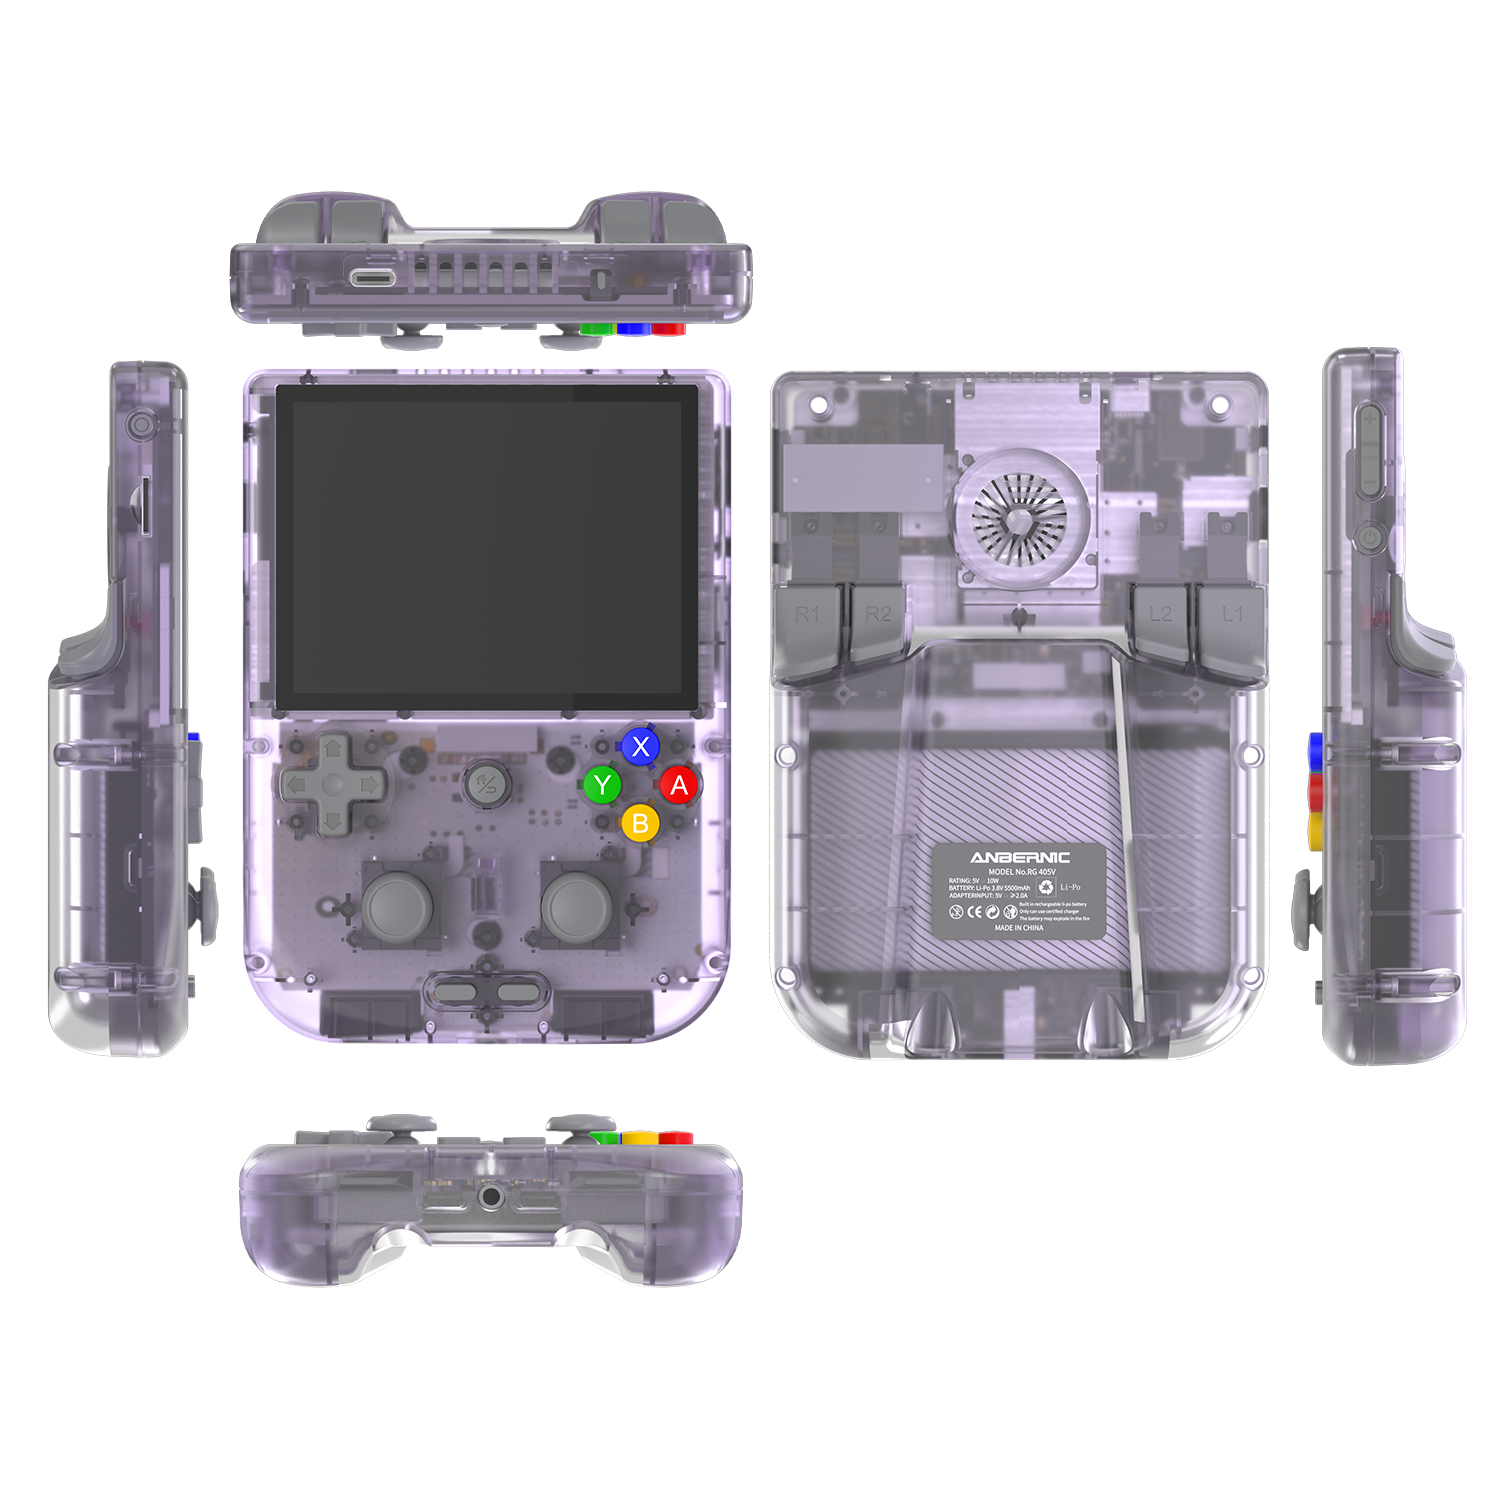 Retro Handheld Gaming Console For Sale - Mechdiy